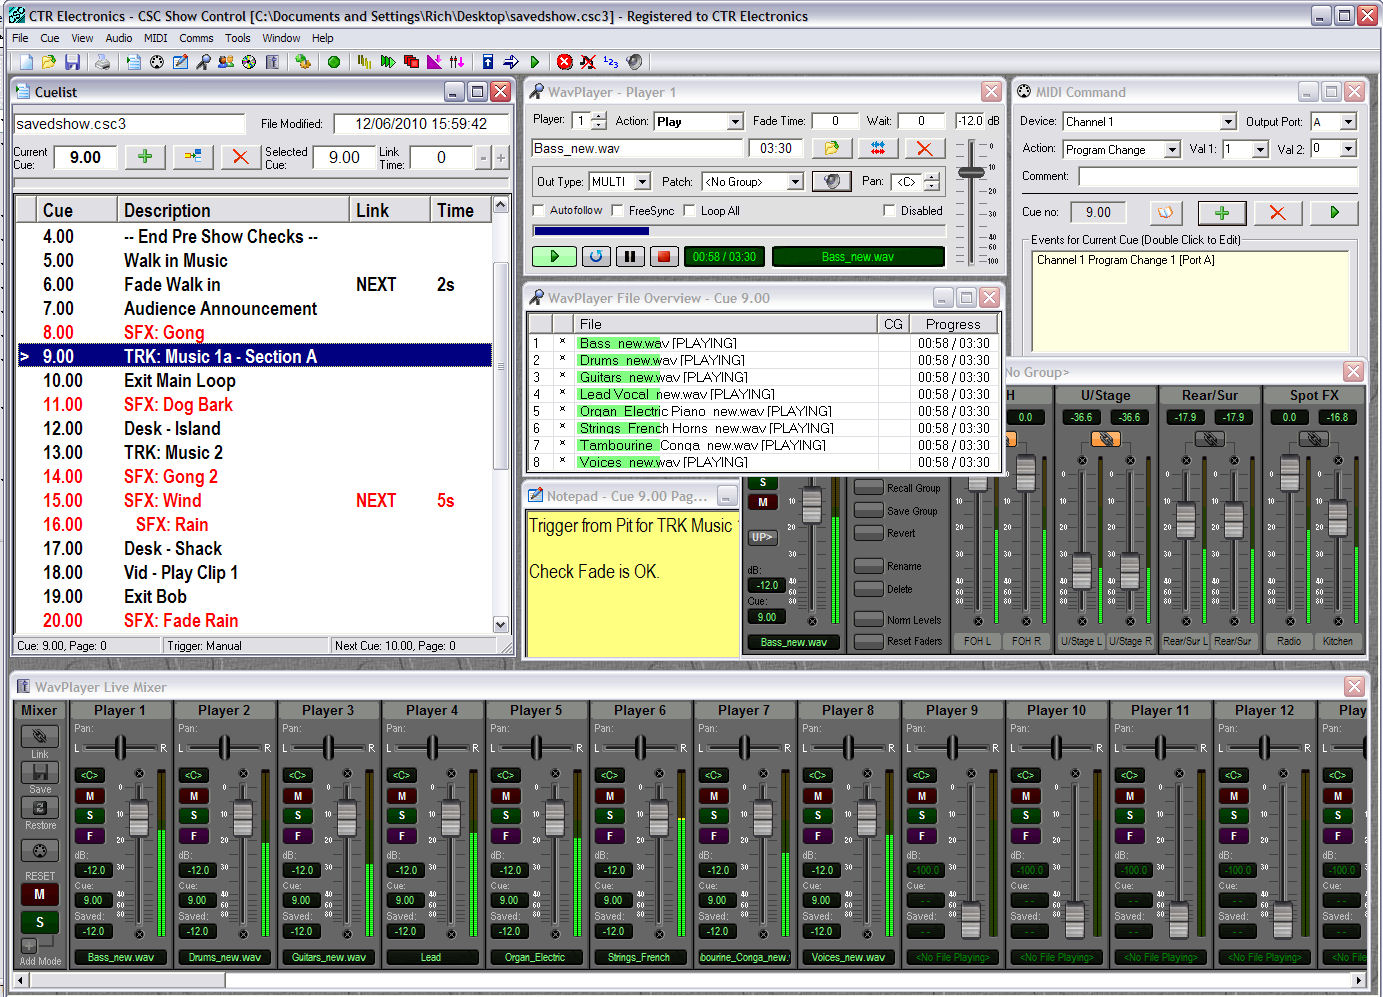 CTR ELECTRONICS CSC SHOW CONTROL SOFTWARE V3.4x (3 Computers on 1 Show)